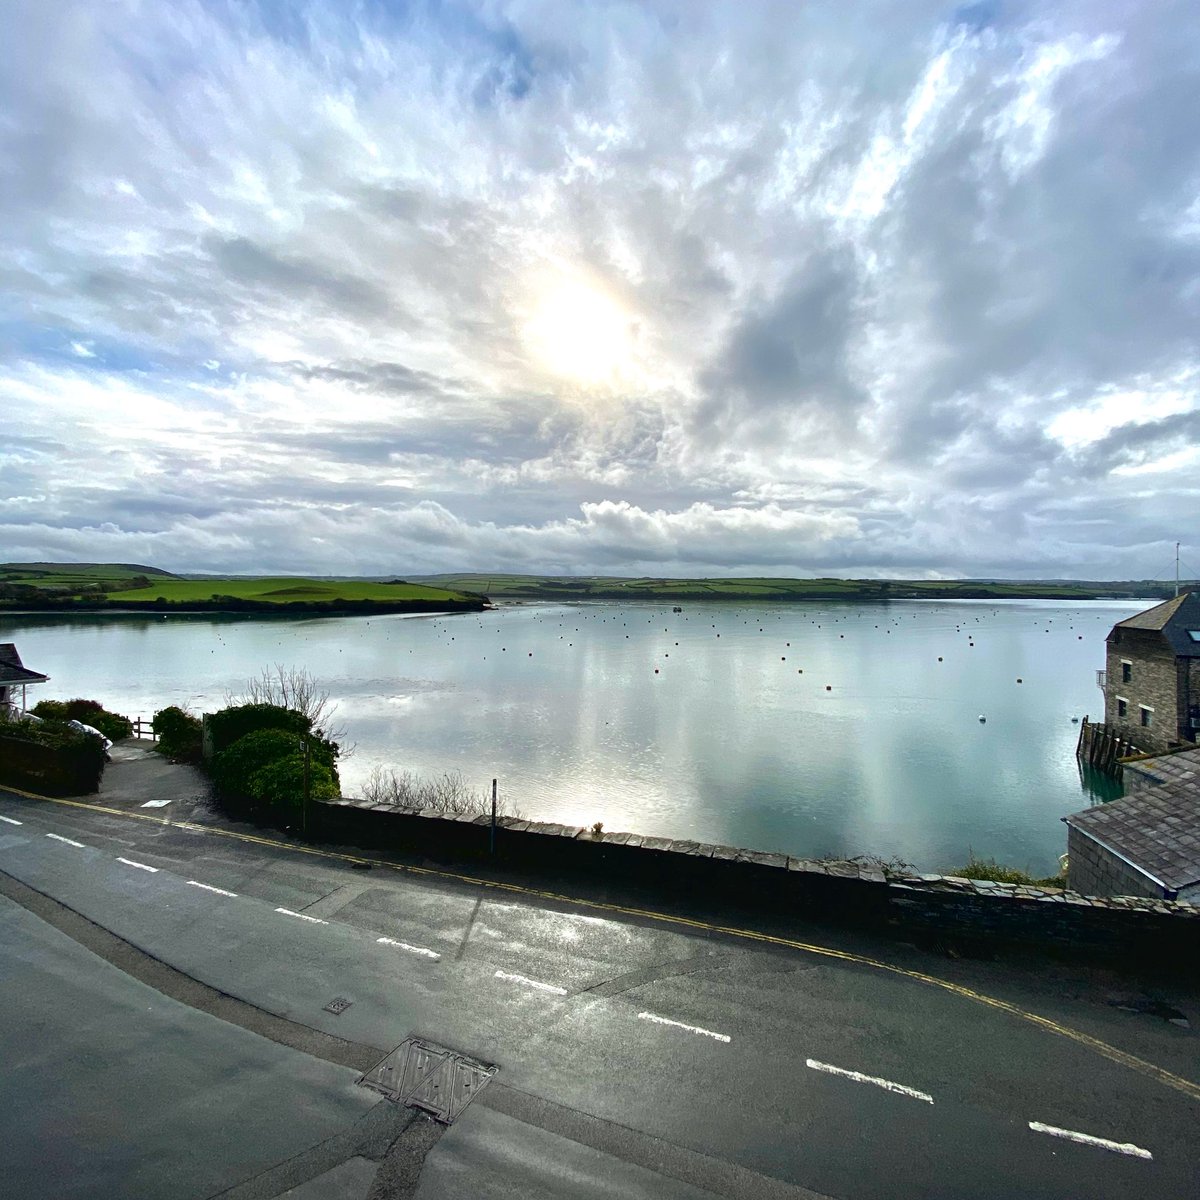 Our beautiful view of the River Camel from Porthilly to Tregonce. For all you missing Cornwall, we hope this brings happy memories and look forward to seeing you soon! ❤️🤞🏼 #rock #onlywayiscornwall @PaulAinsw6rth #ainsworthcollection #camelestuary